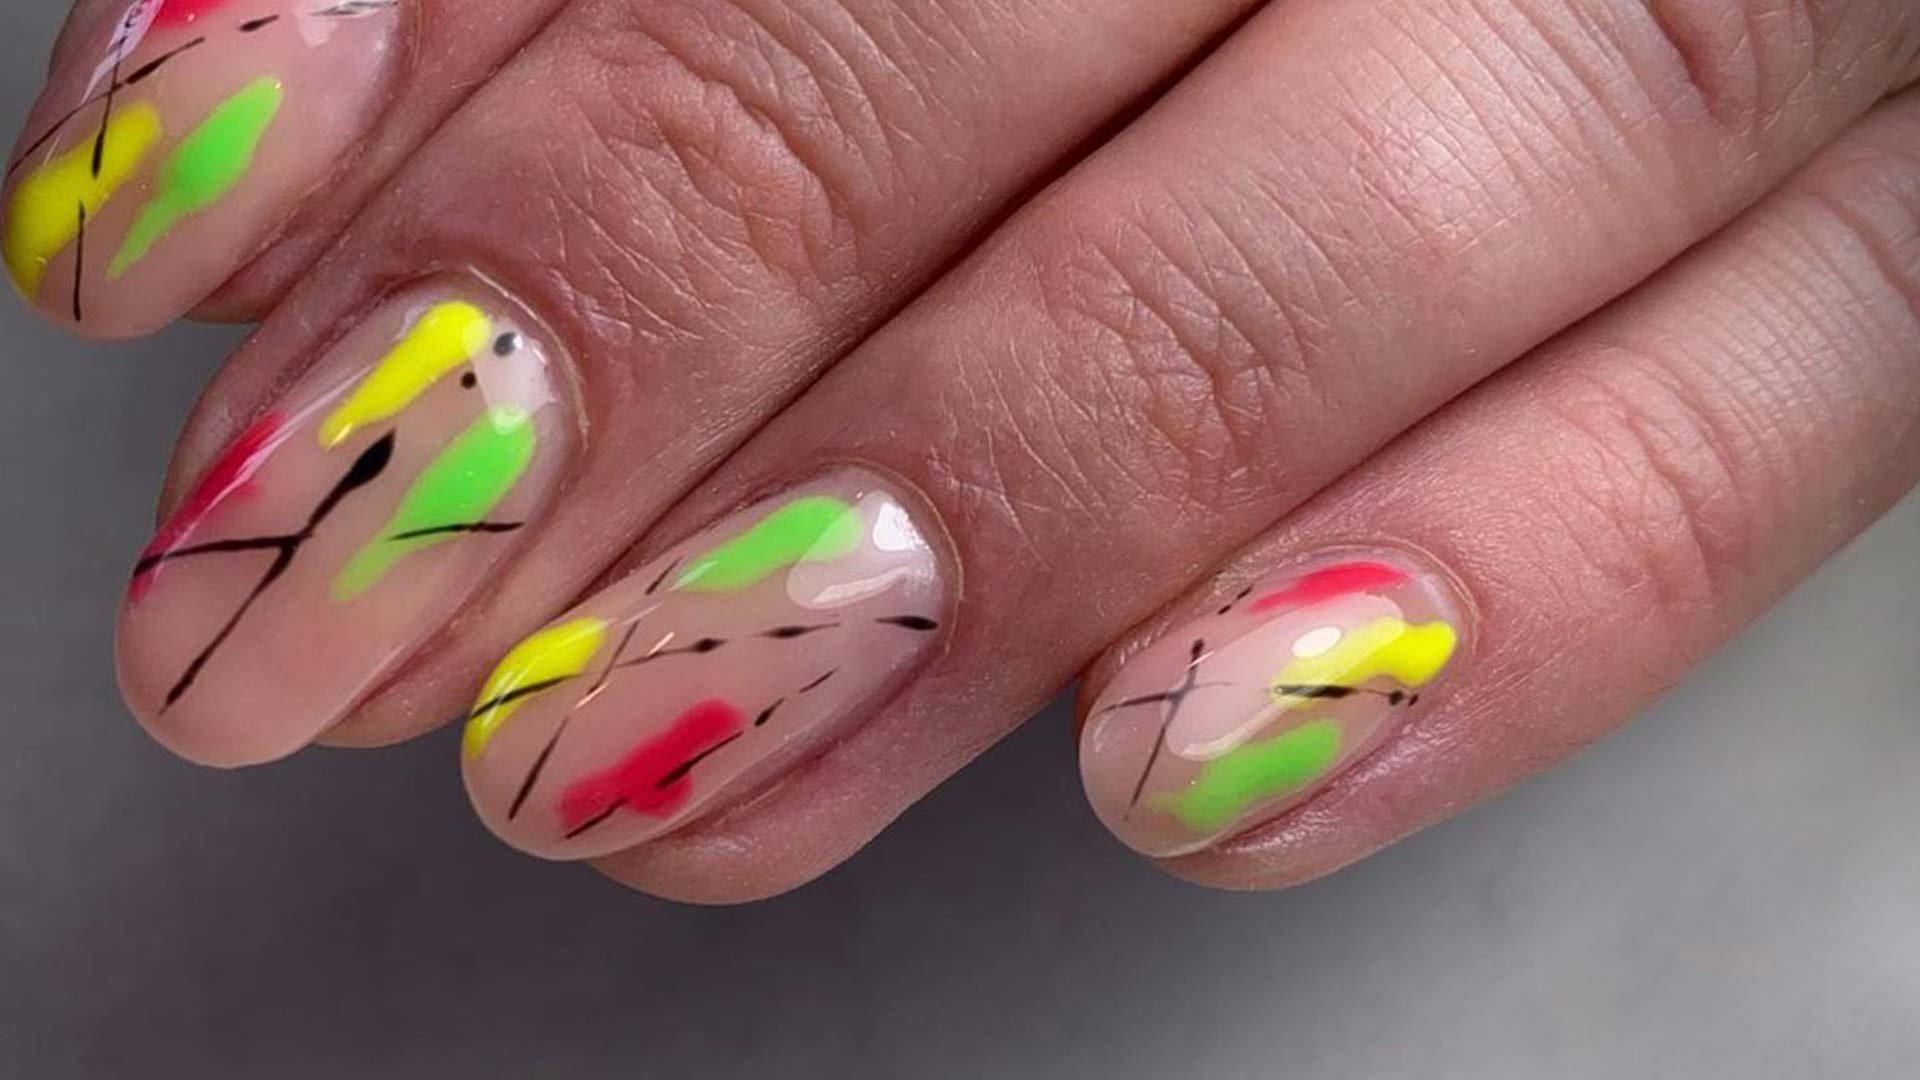 7. "Funky neon nail designs for short nails" - wide 9